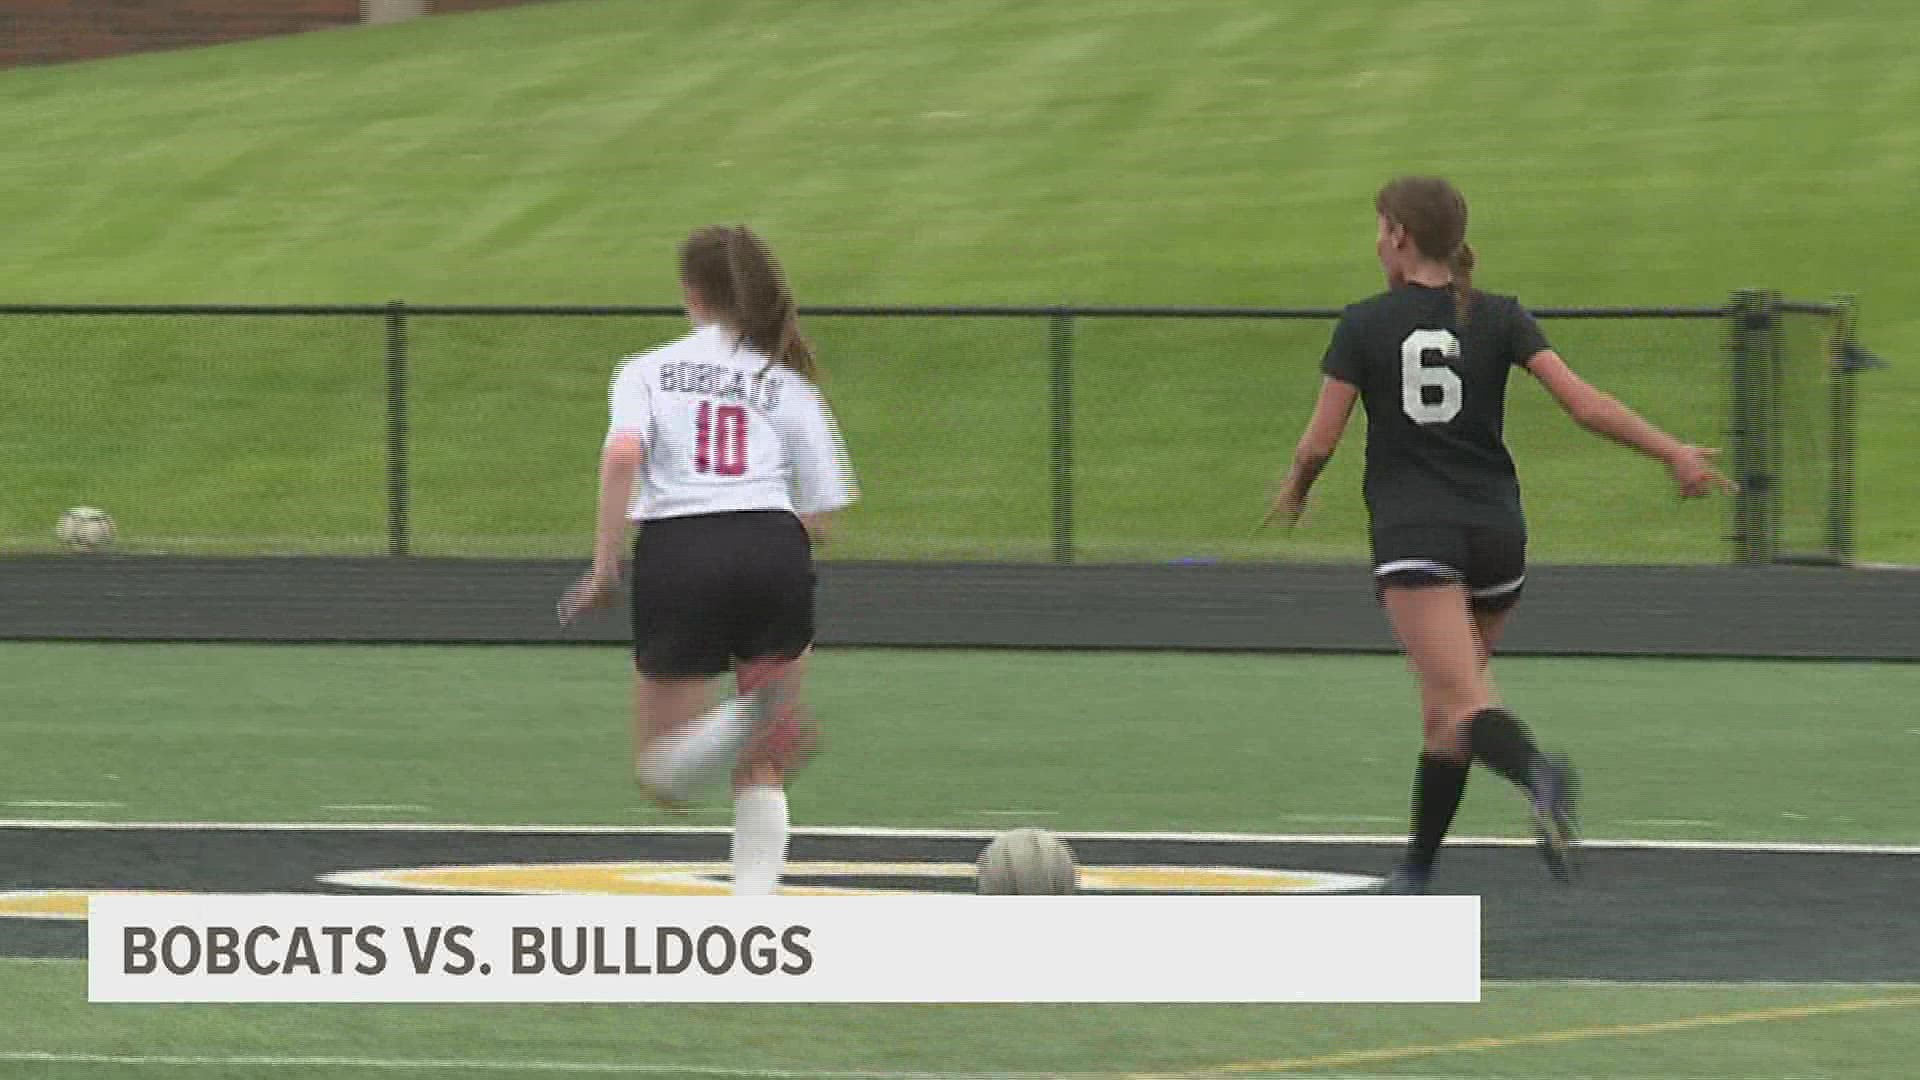 Six combined goals from Bettendorf's Avery Horner and Peyton Markham was more than enough in the win.